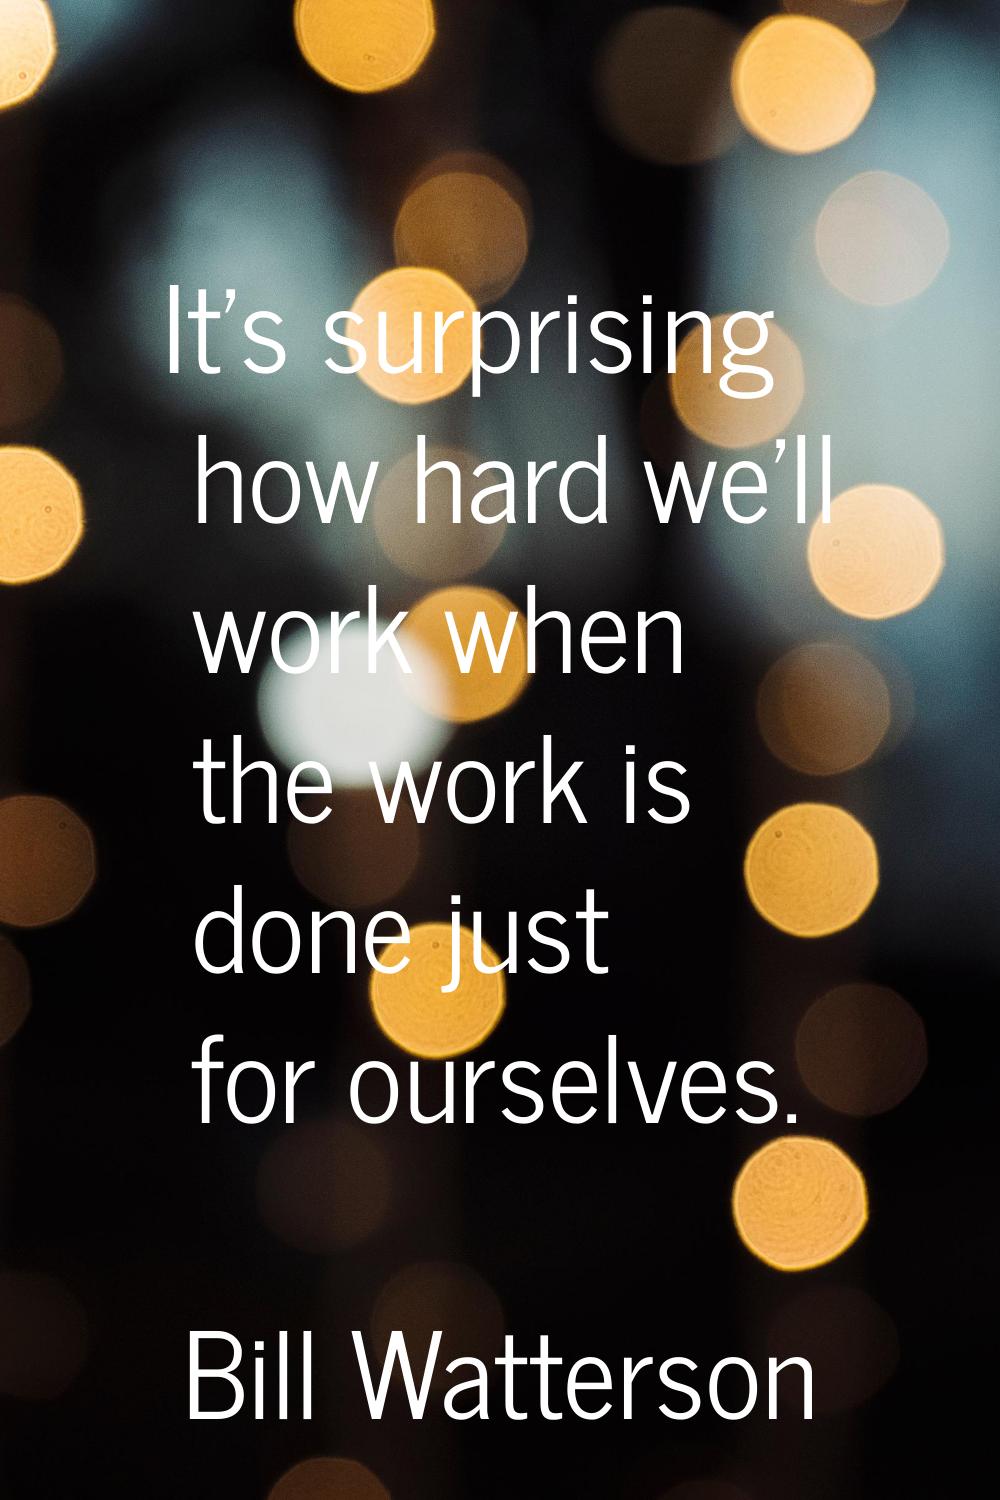 It's surprising how hard we'll work when the work is done just for ourselves.